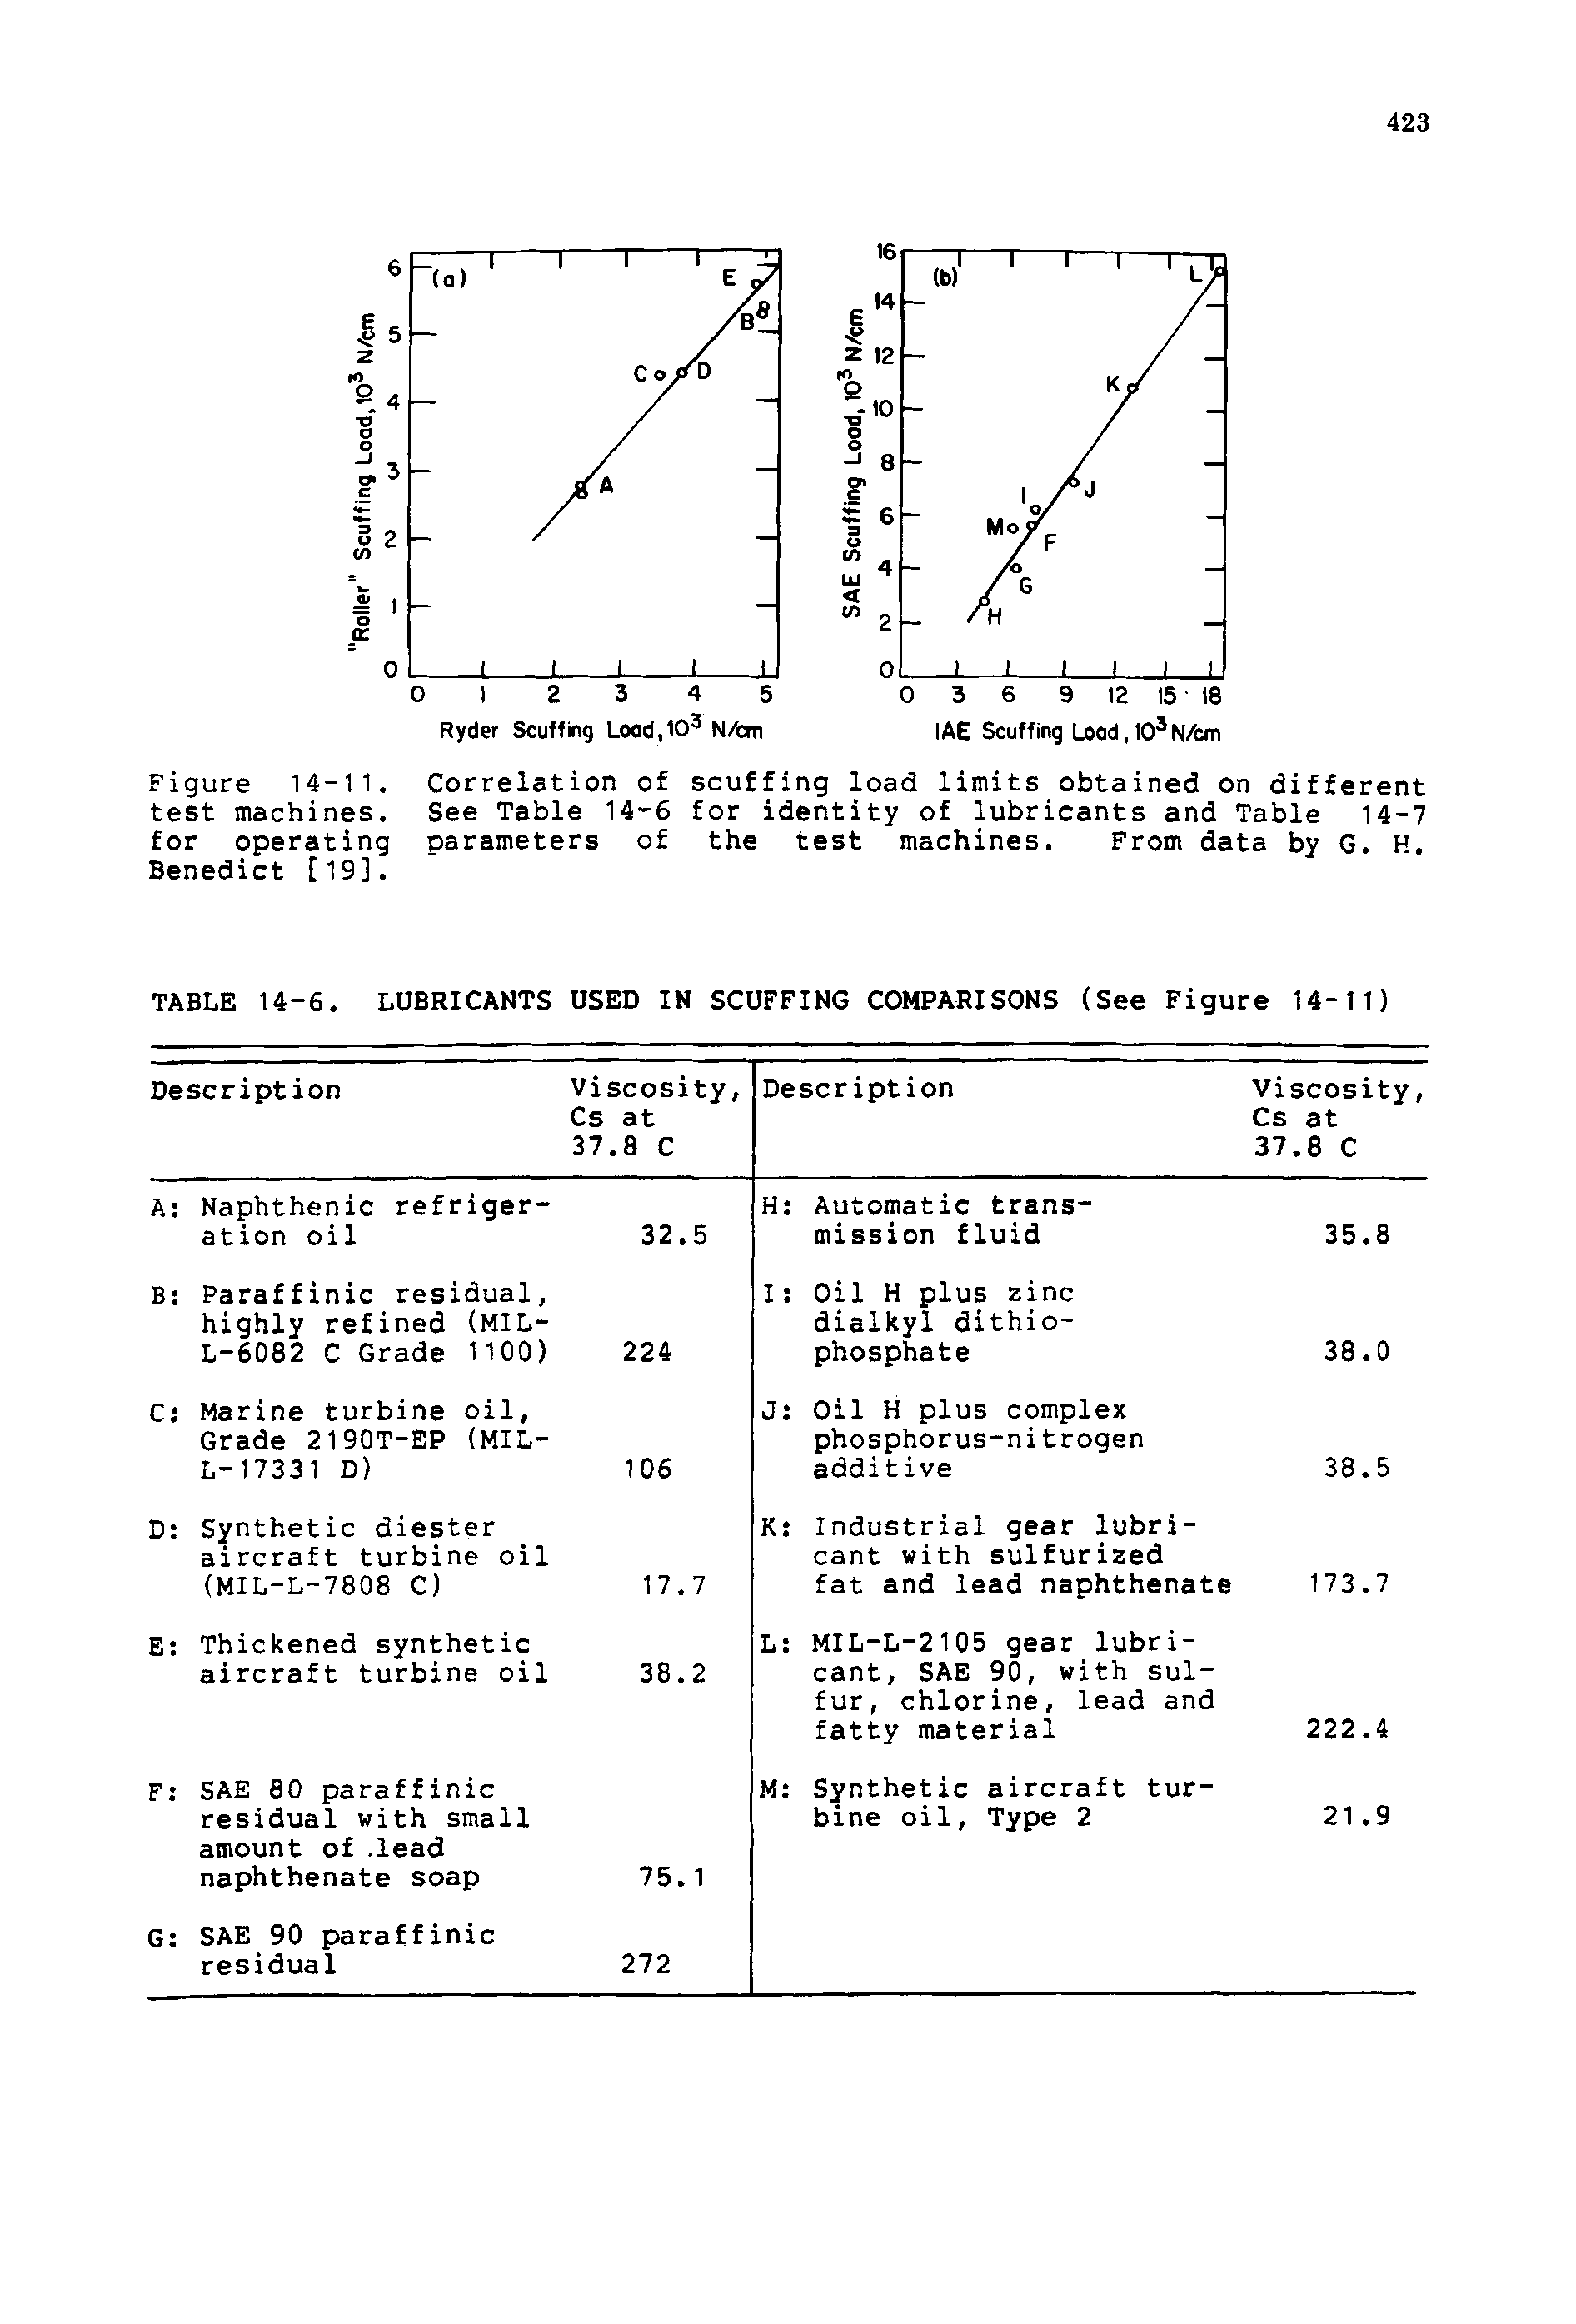 Figure 14-11. Correlation of scuffing load limits obtained on different test machines. See Table 14-6 for identity of lubricants and Table 14-7 for operating parameters of the test machines. From data by G. H. Benedict [19].